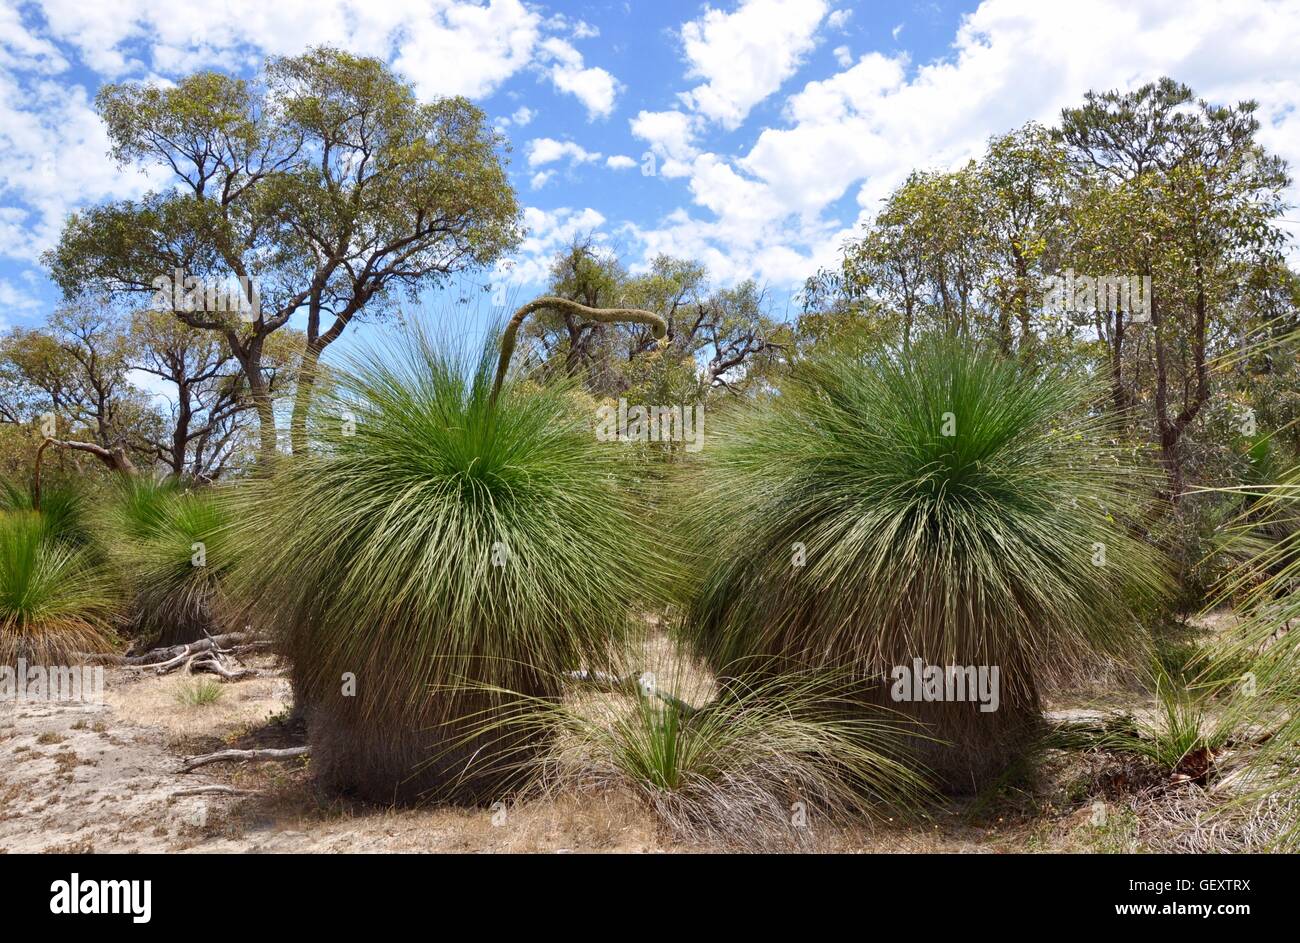 Spiky yakka, or grass, trees in the Bibra Lake Reserve natural bushland area under a blue sky with clouds in Western Australia. Stock Photo